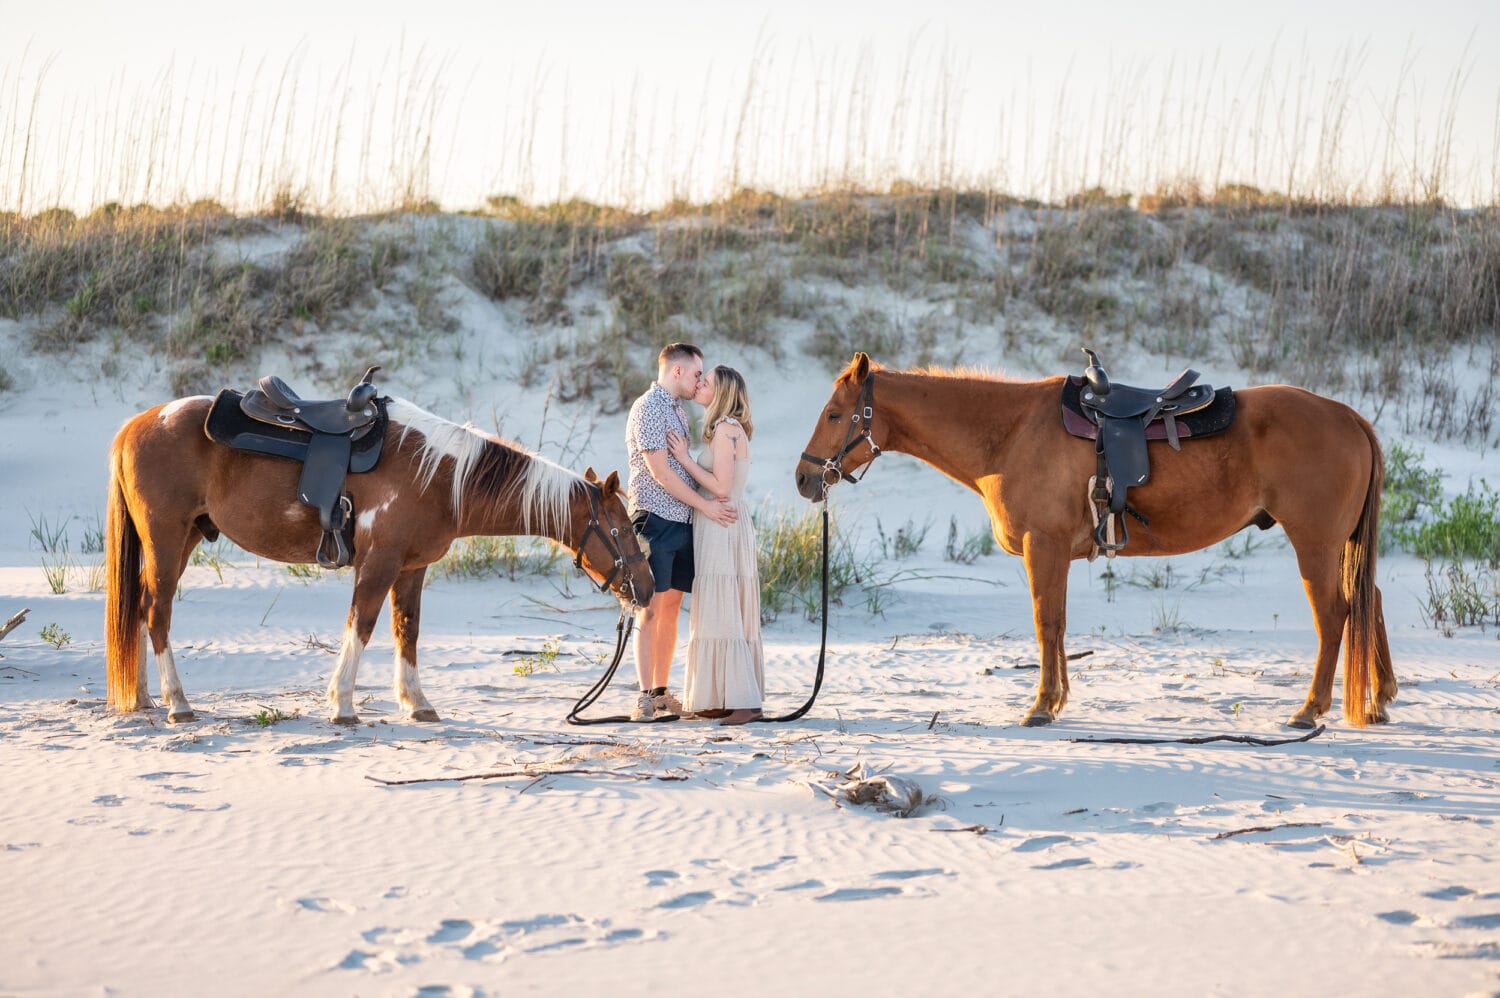 Kiss after private horseback ride on the beach - Inlet Point Plantation - Little River